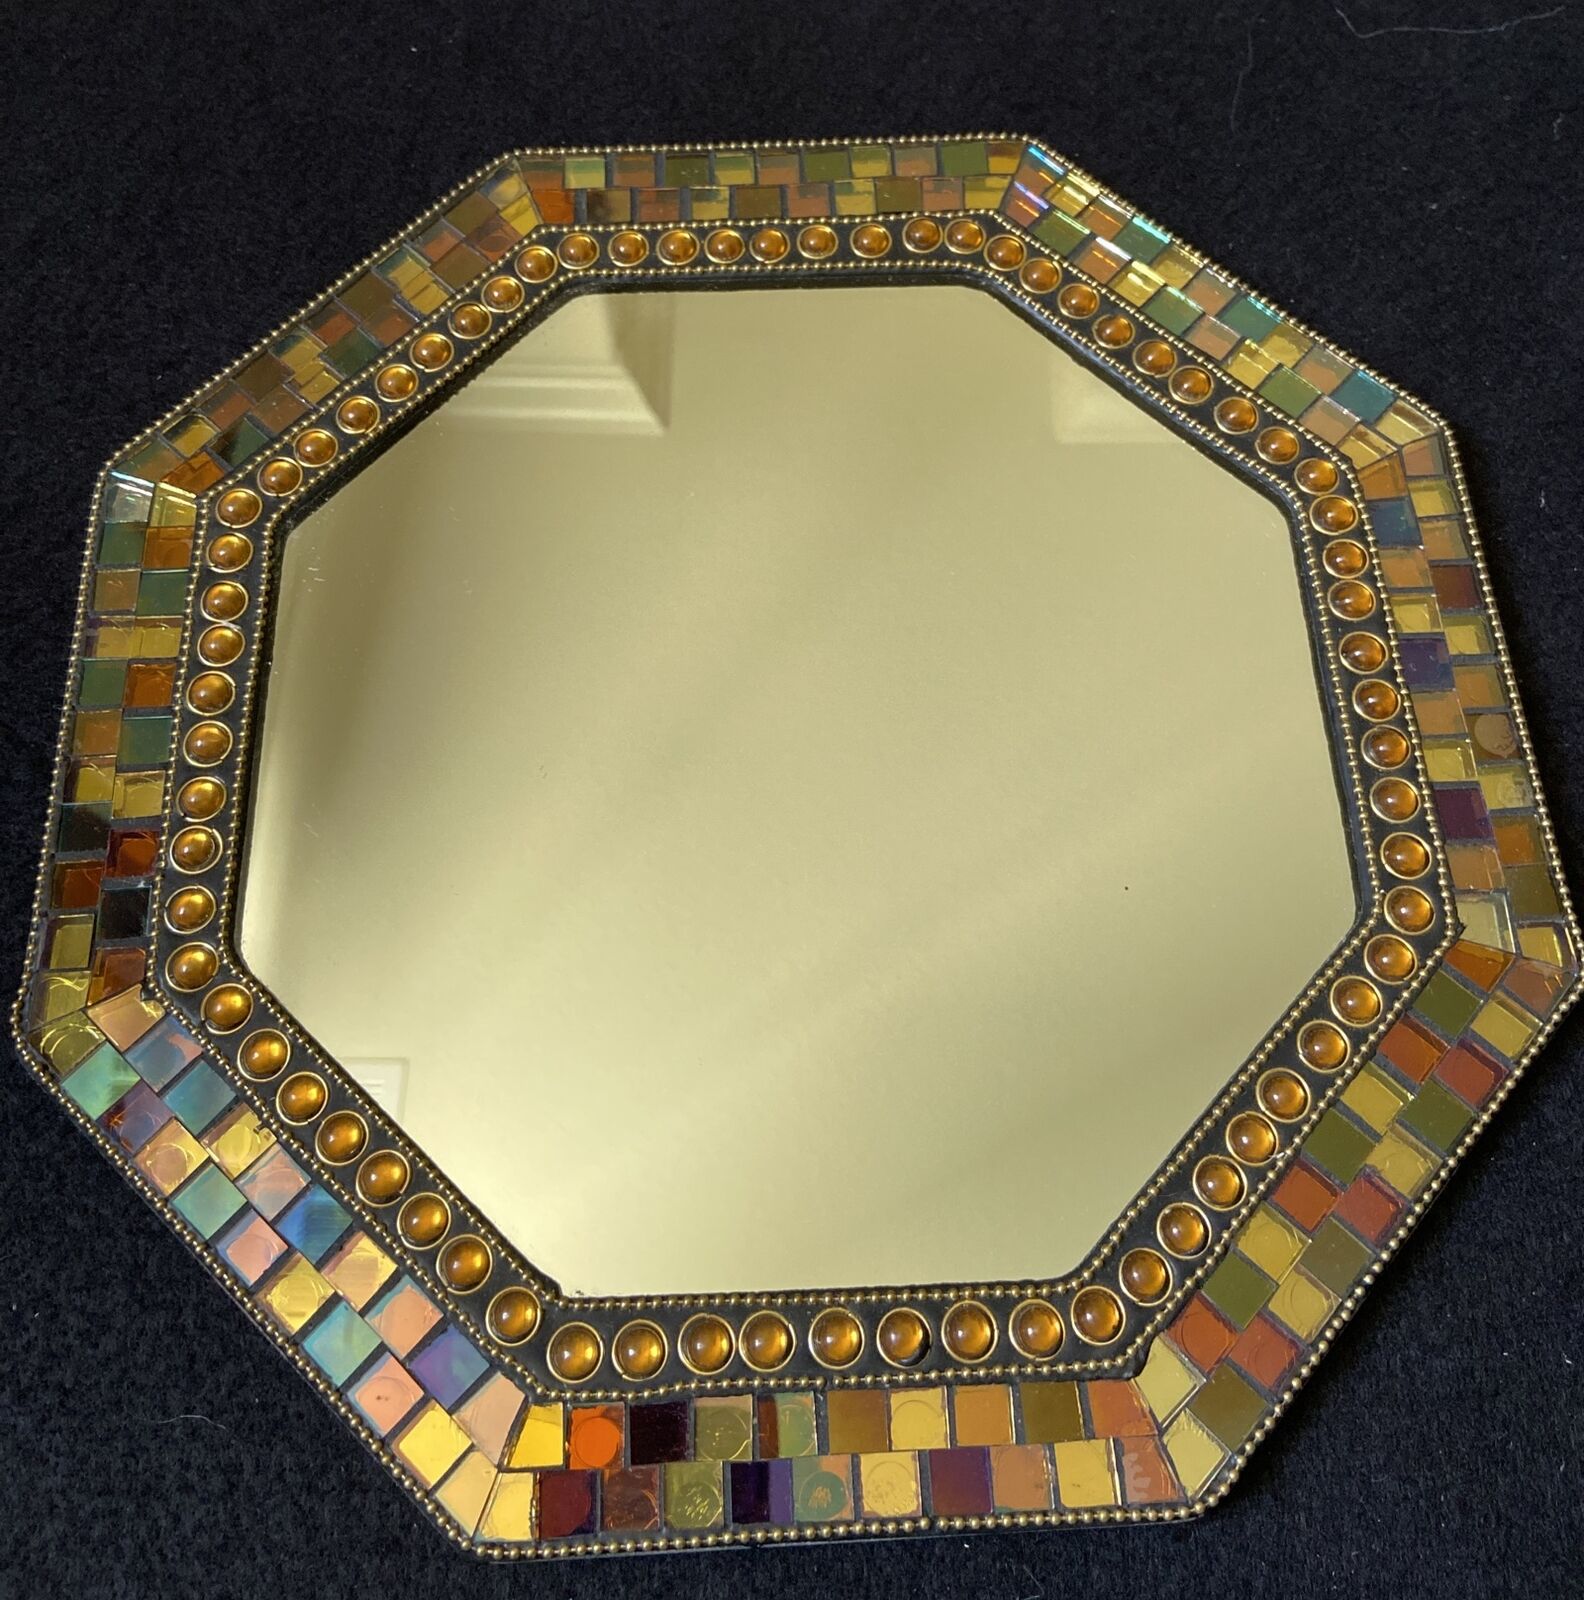 PartyLite Global Fusion Mirrored Candle Tray Retired